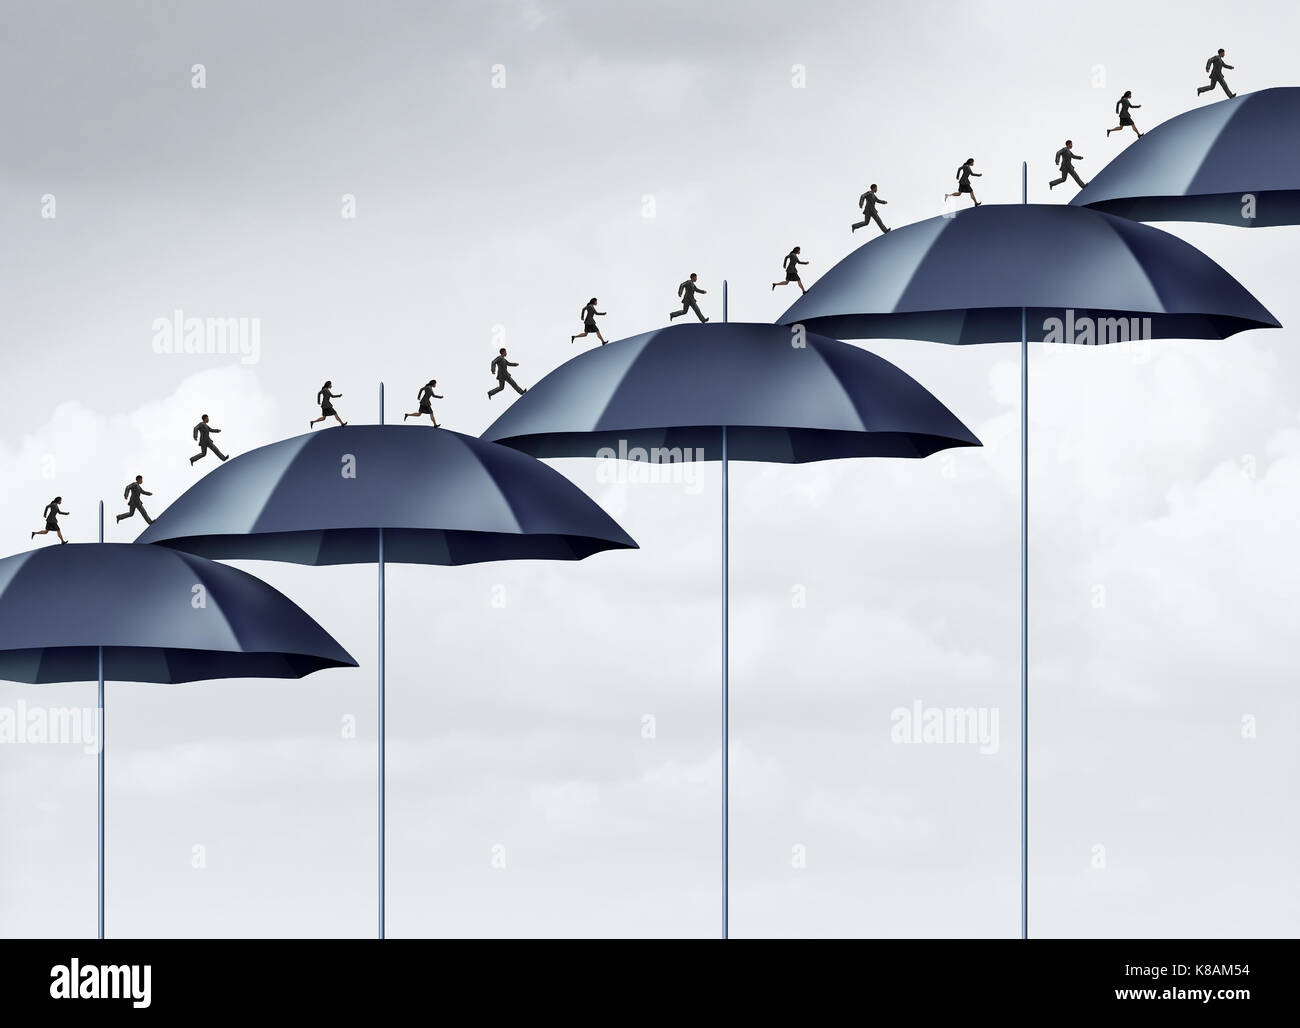 Security increase business safety strategy concept as a group of people running upward with a rising chart of umbrella objects as an employee. Stock Photo